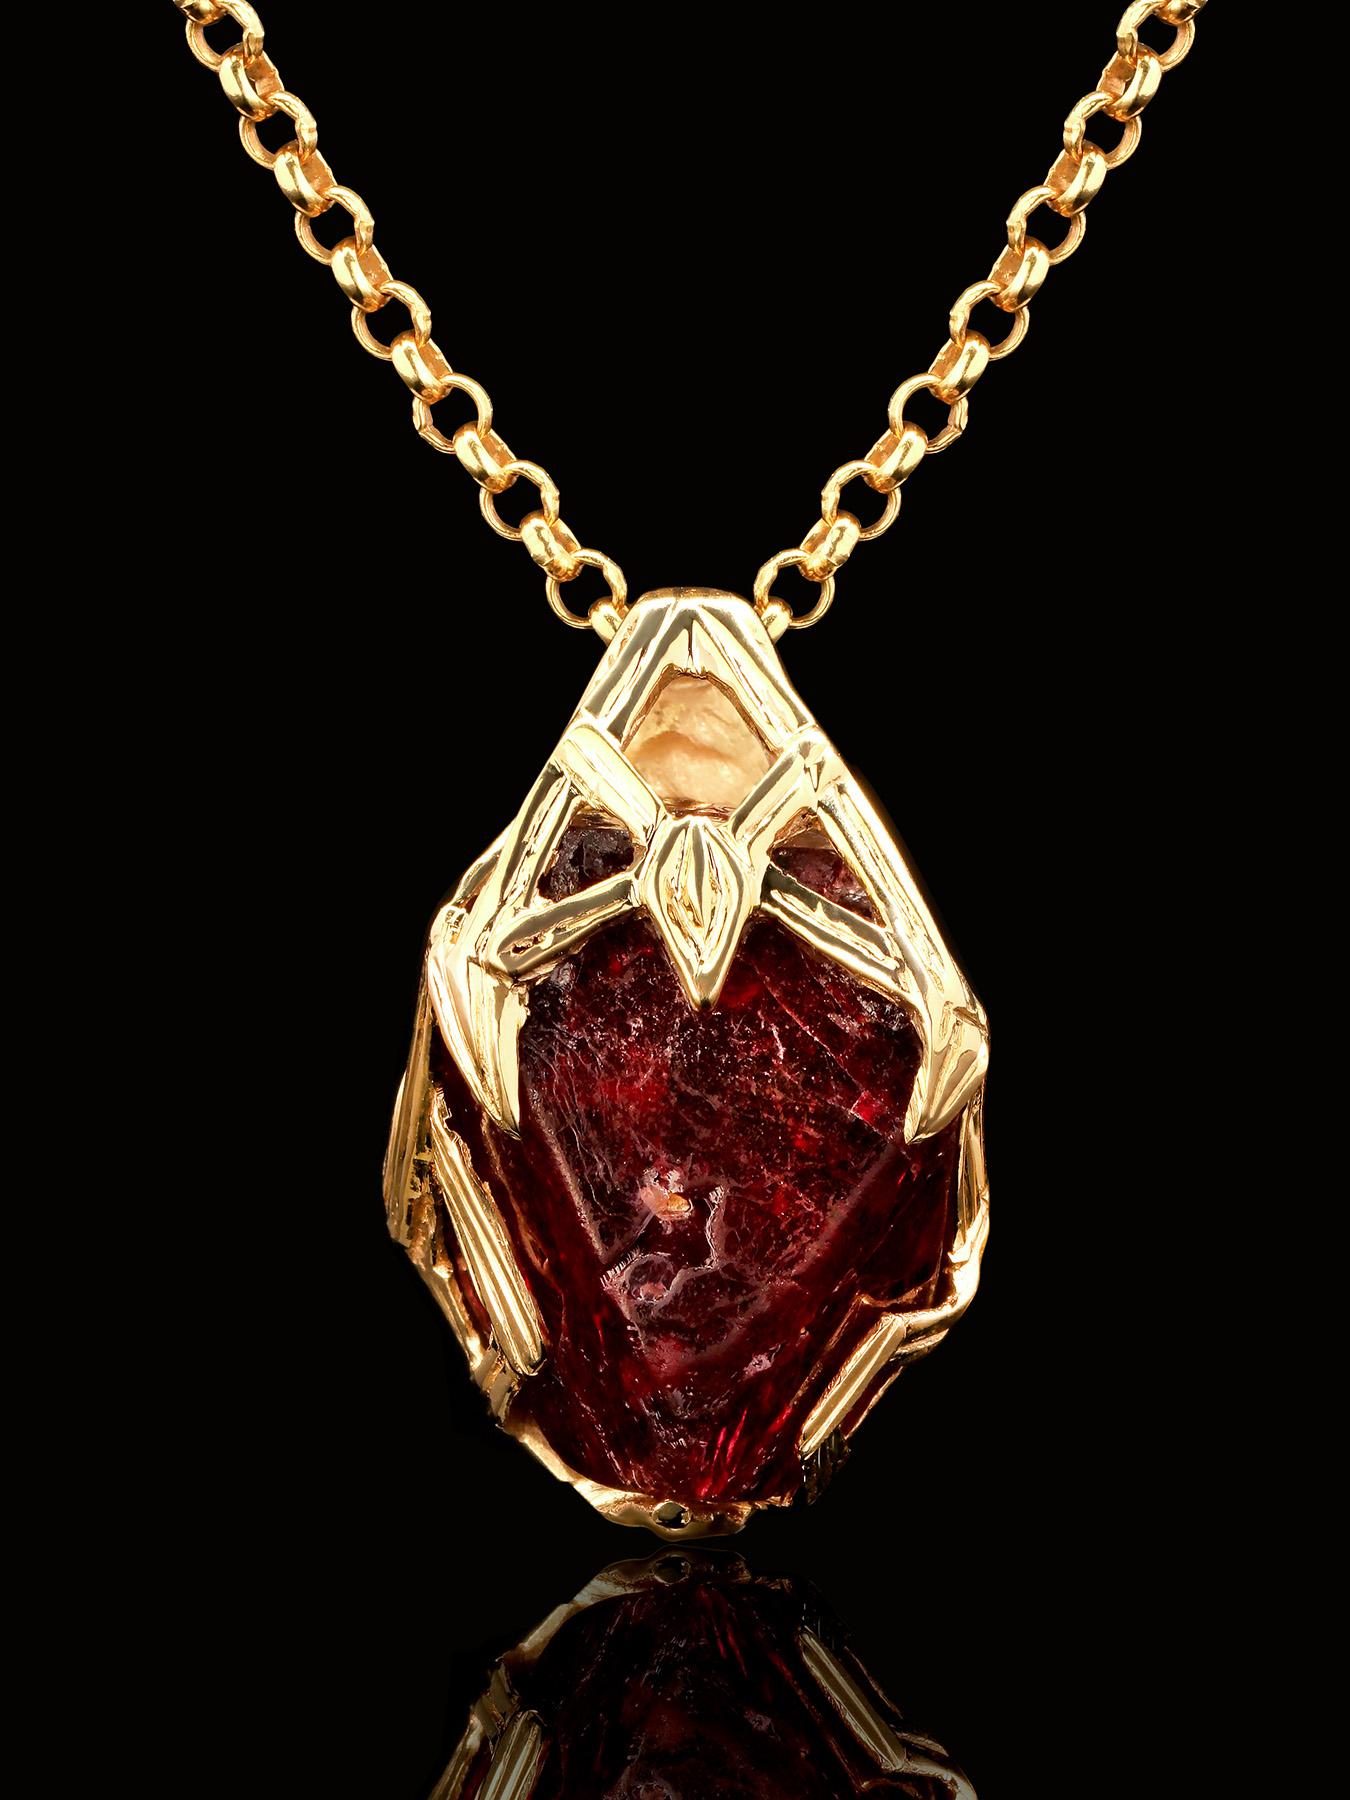 18K gold pendant with natural Crystal of red spinel 
crystal origin - Burma
spinel measurements - 0.31 x 0.39 x 0.59 in / 8 x 10 x 15 mm
spinel weight - 11.85 carats
pendant length - 1.18 in / 30 mm
pendant weight - 4.40 grams

Devotion